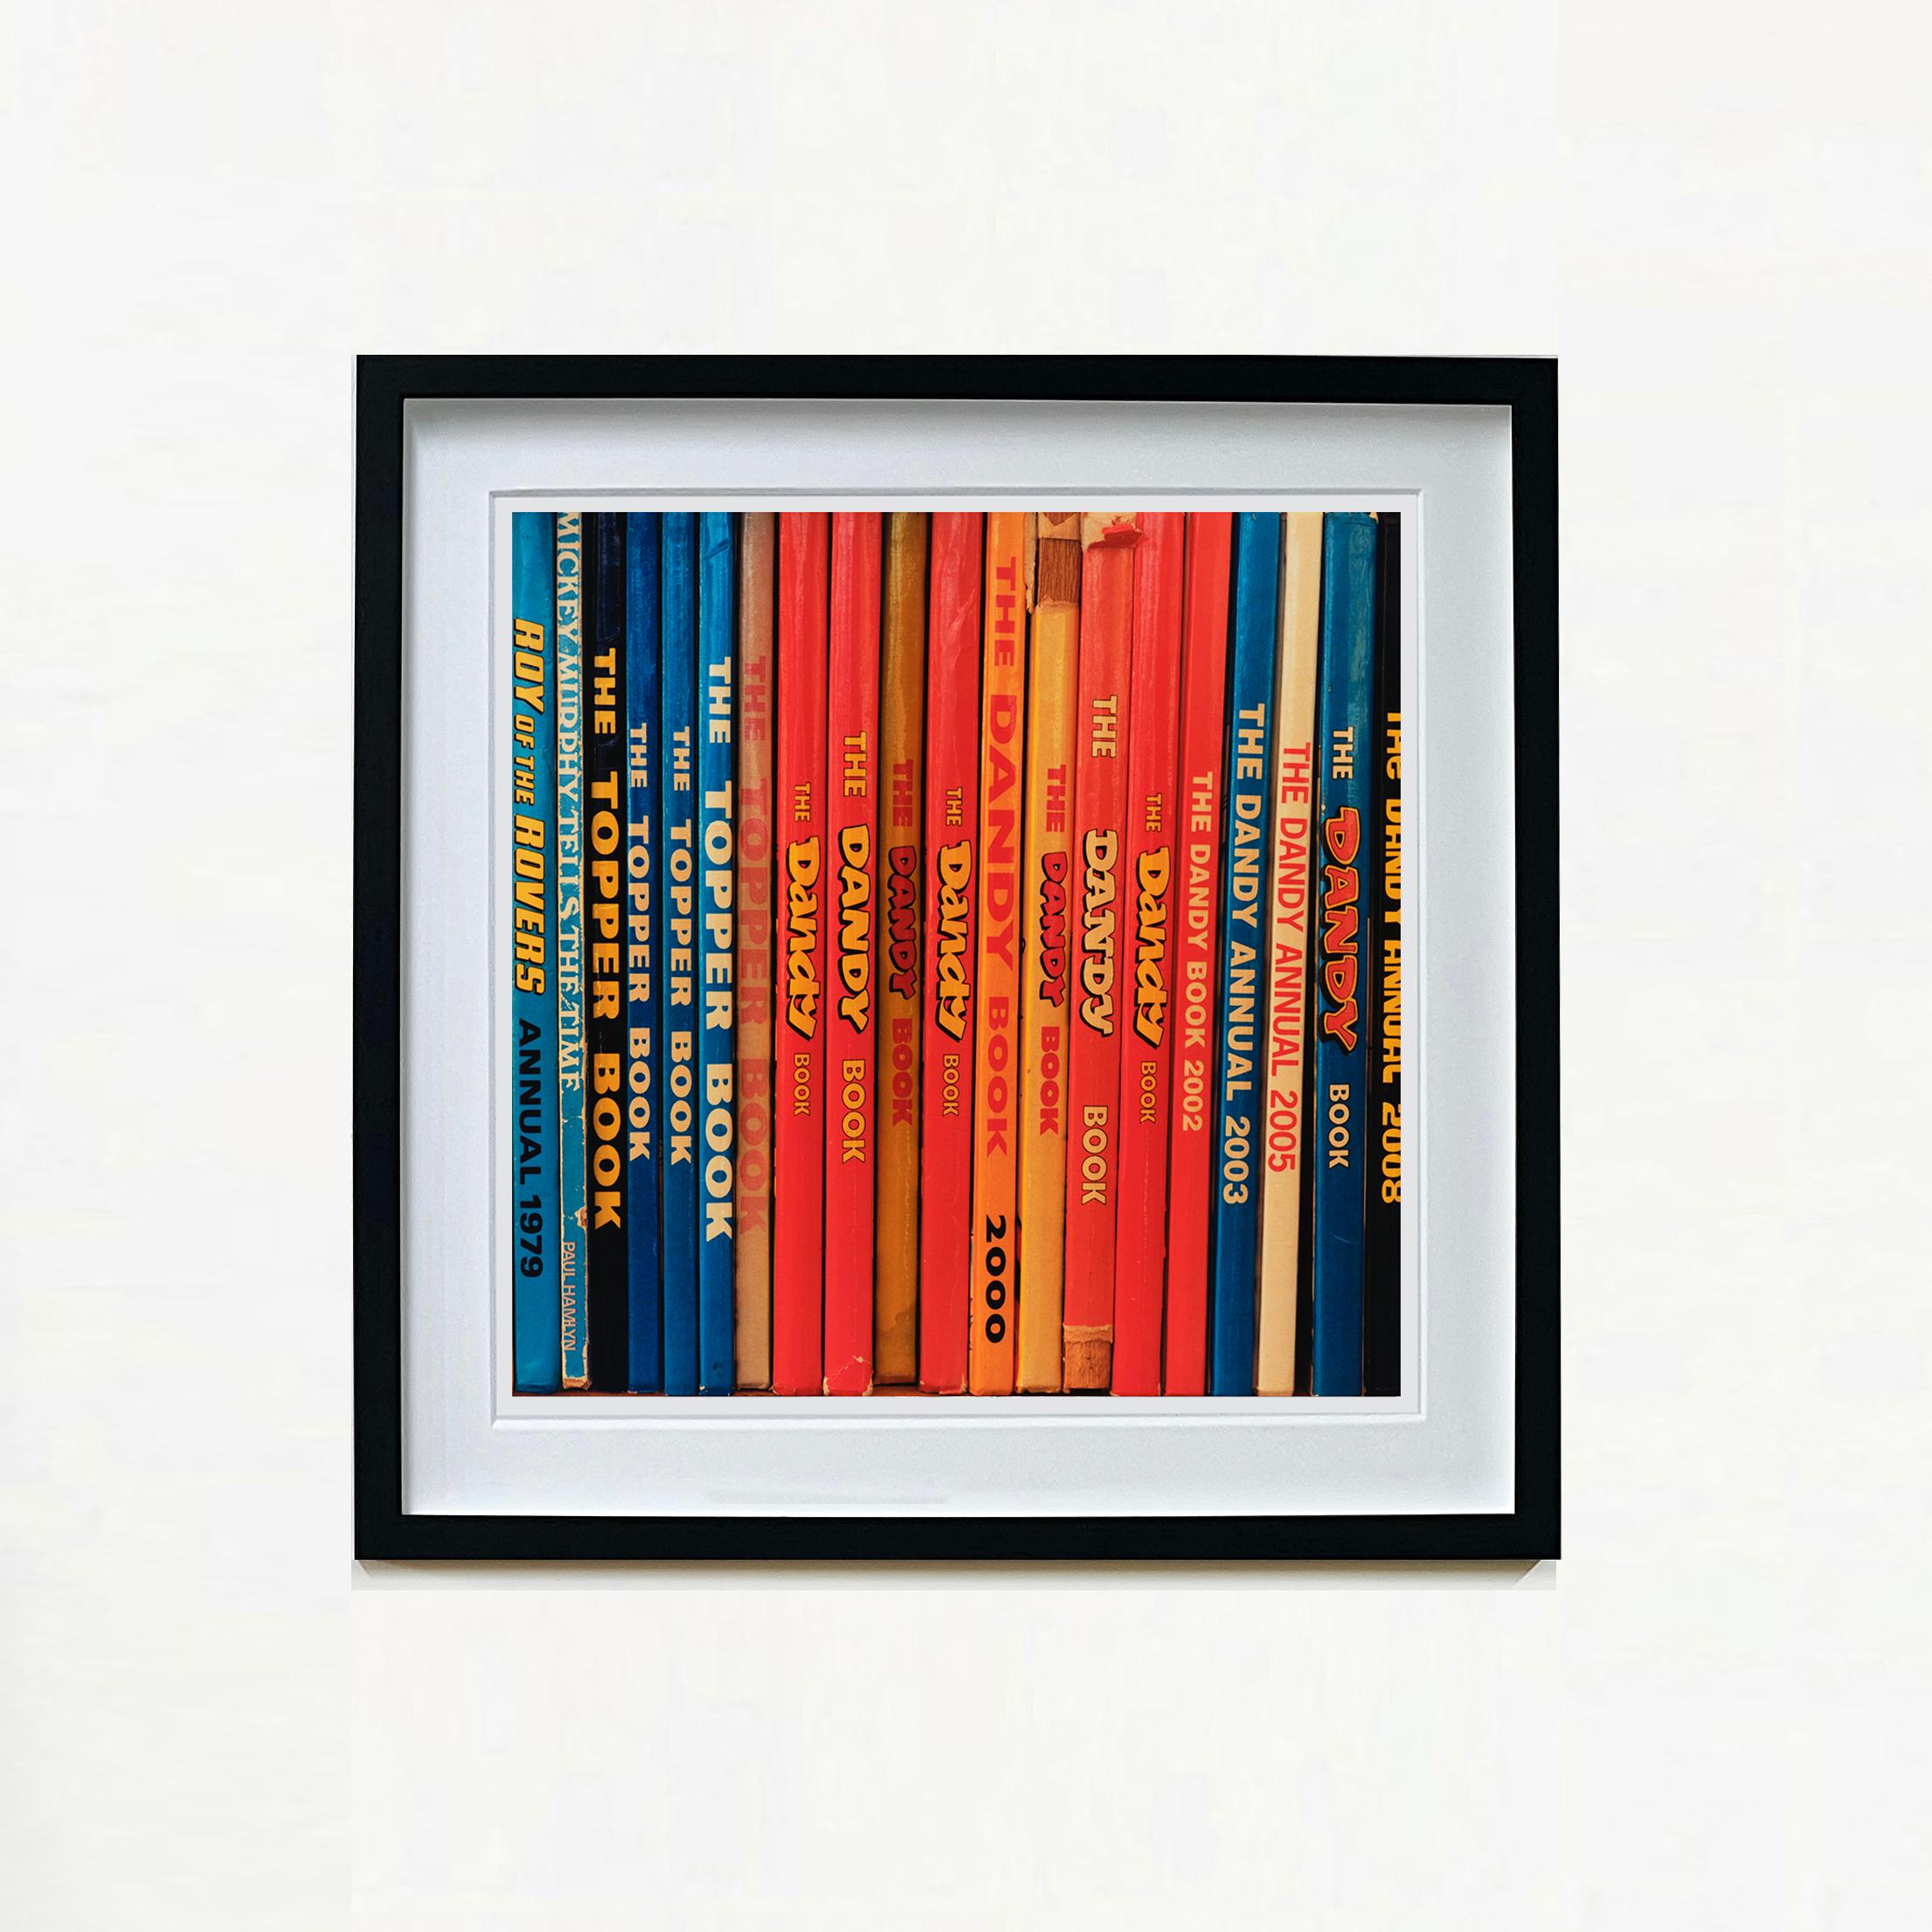 The Rovers, Burnham Market, Norfolk - Vintage book spines multicolor photograph - Photograph by Richard Heeps